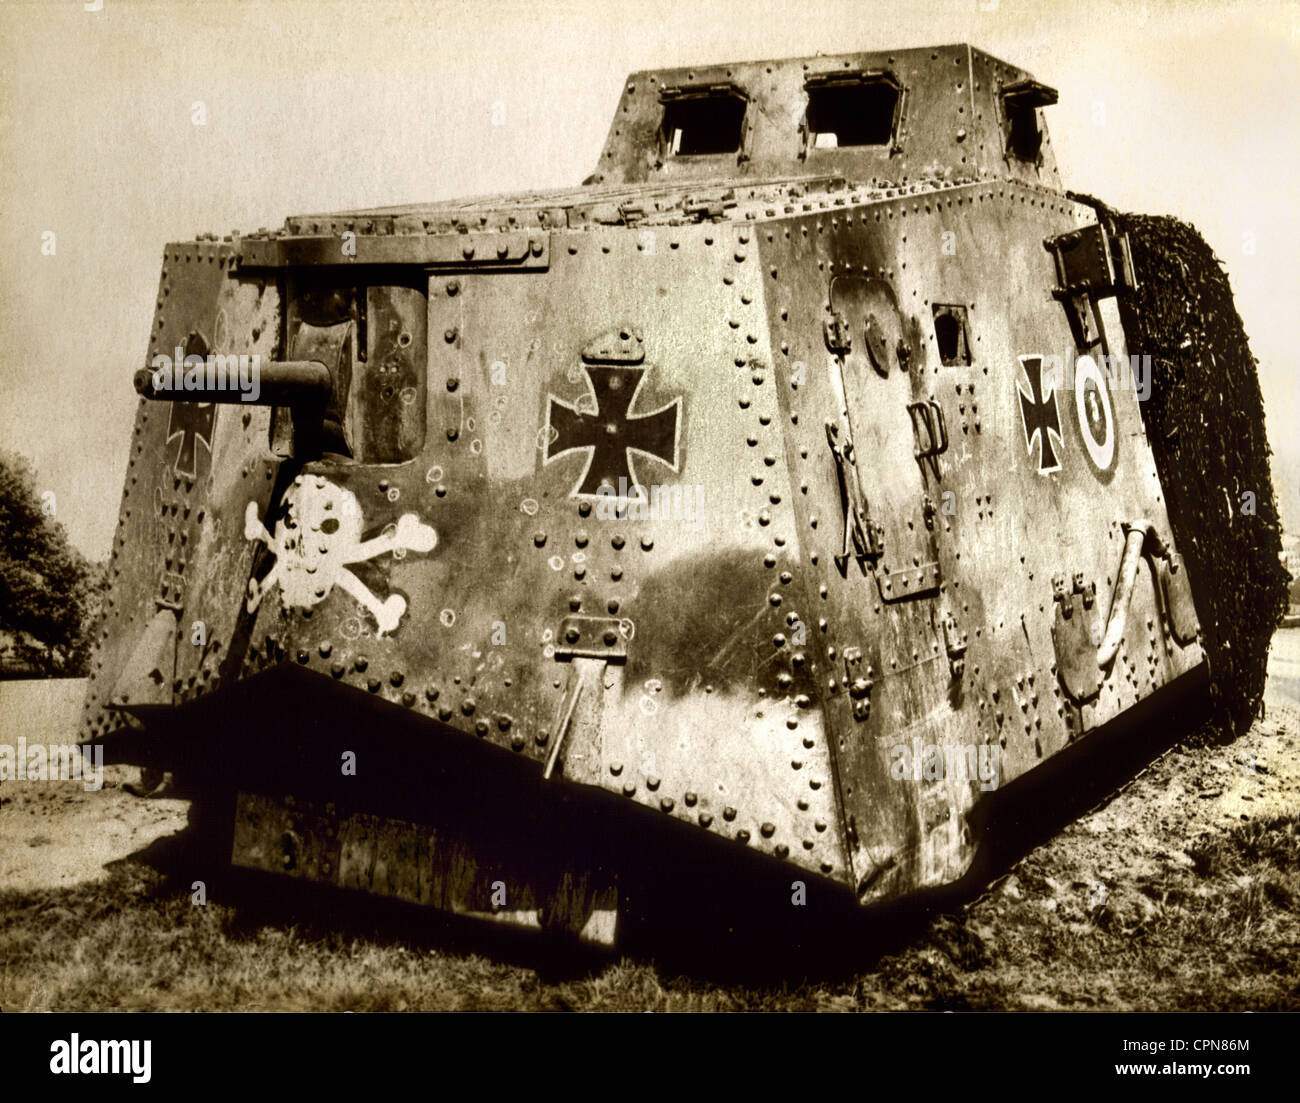 First World War / WWI,assault tank combat vehicle A7V,prototype 1917,alltogether only 20 exemplar made by Daimler,first war effort on 21.03.1918 near St. Quentin,mounted with rapid-fire cannon 5.7 centimeter,6 MGs,length 7.35 meters,height 3.35m,plating up to to 30mm,maximum speed 16 kilometers/hour,first German tank,Germany,1917,commandant tower,panzer,at that time called Tank,Tanks,armaments,equipment,equipments,martial,warlike,skull and crossbones,gun,guns,cannon,cannons,armoured car,combat tank,combat tanks,battle tanks,tank ,Additional-Rights-Clearences-Not Available Stock Photo